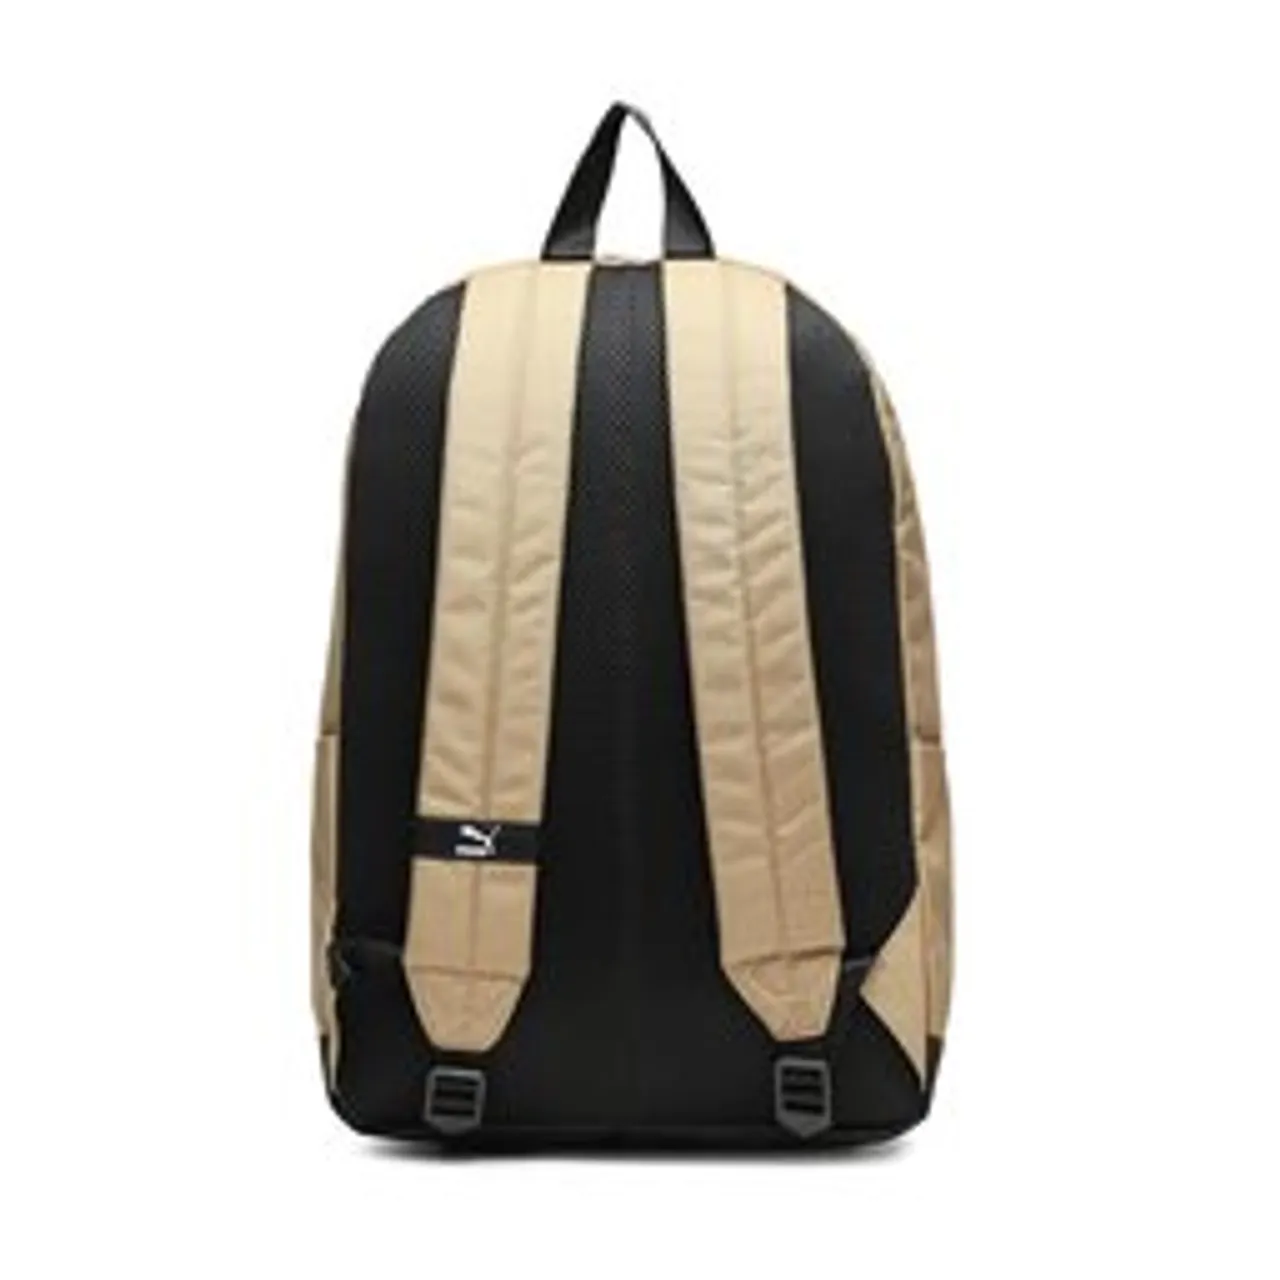 Rucksack Puma Downtown Backpack Toasted 079659 04 Toasted